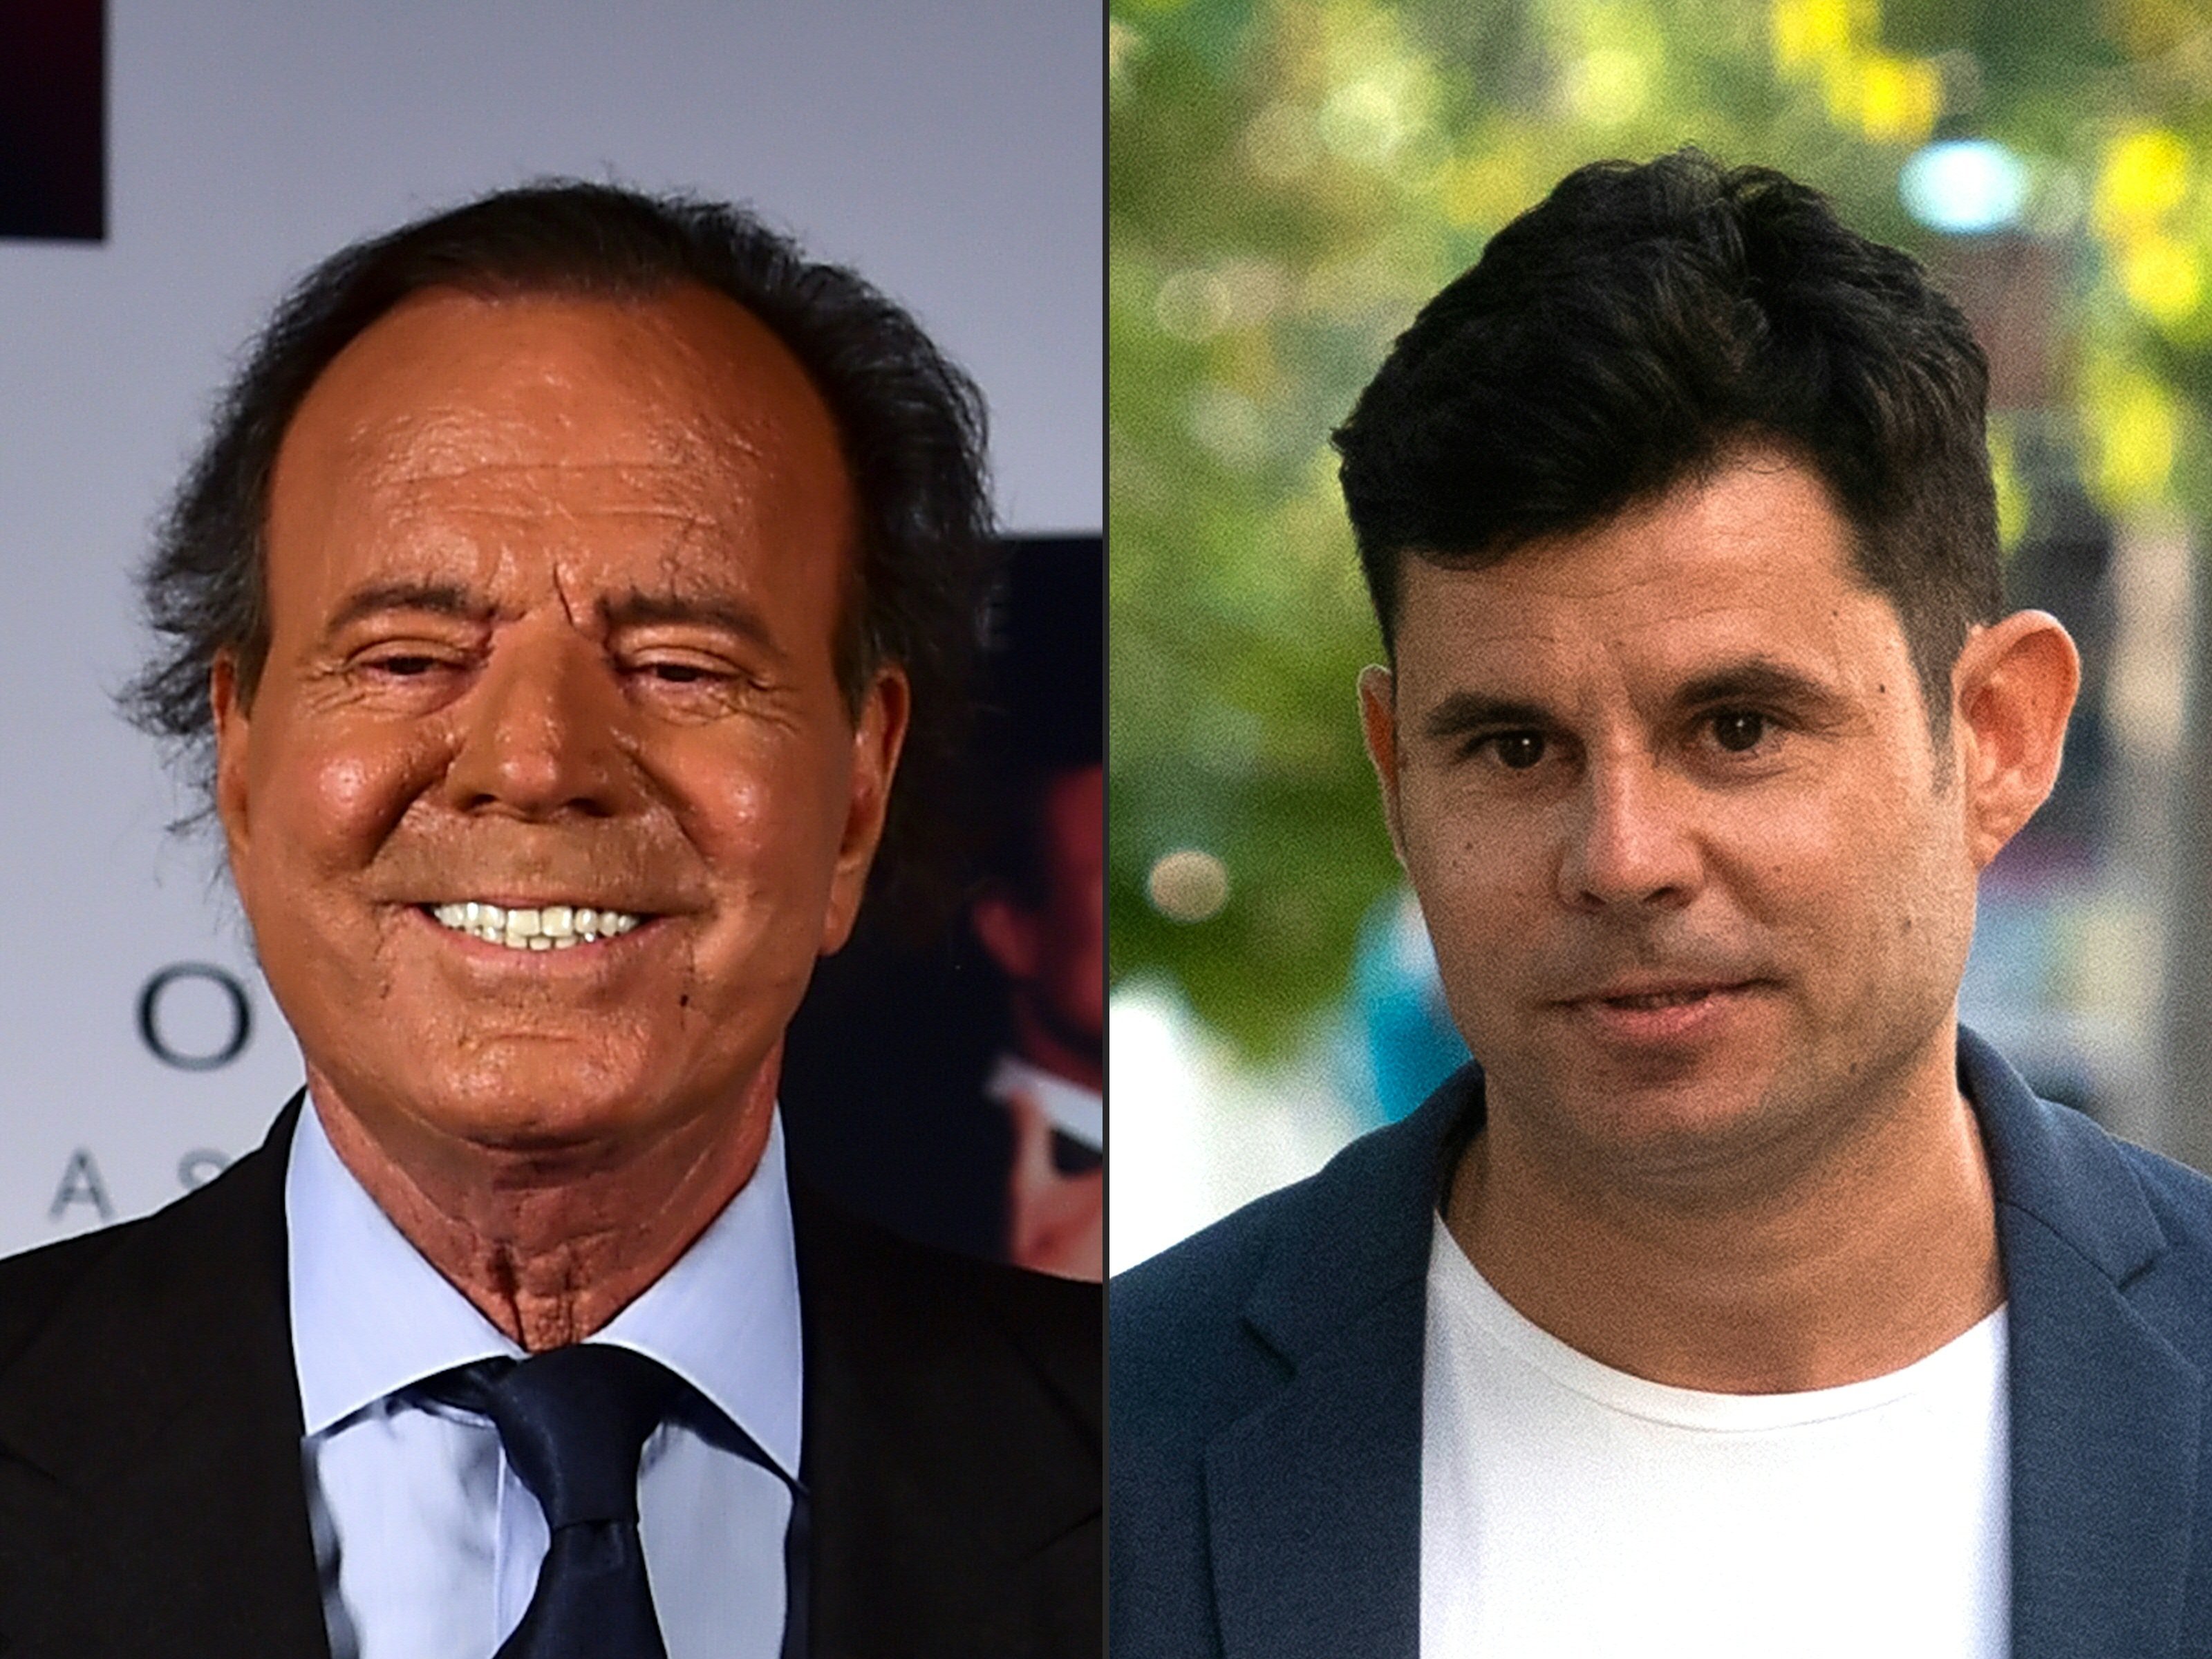 Julio Iglesias in Mexico on September 23, 2015, and Javier Sánchez in Valencia on July 4, 2019 | Source: Getty Images